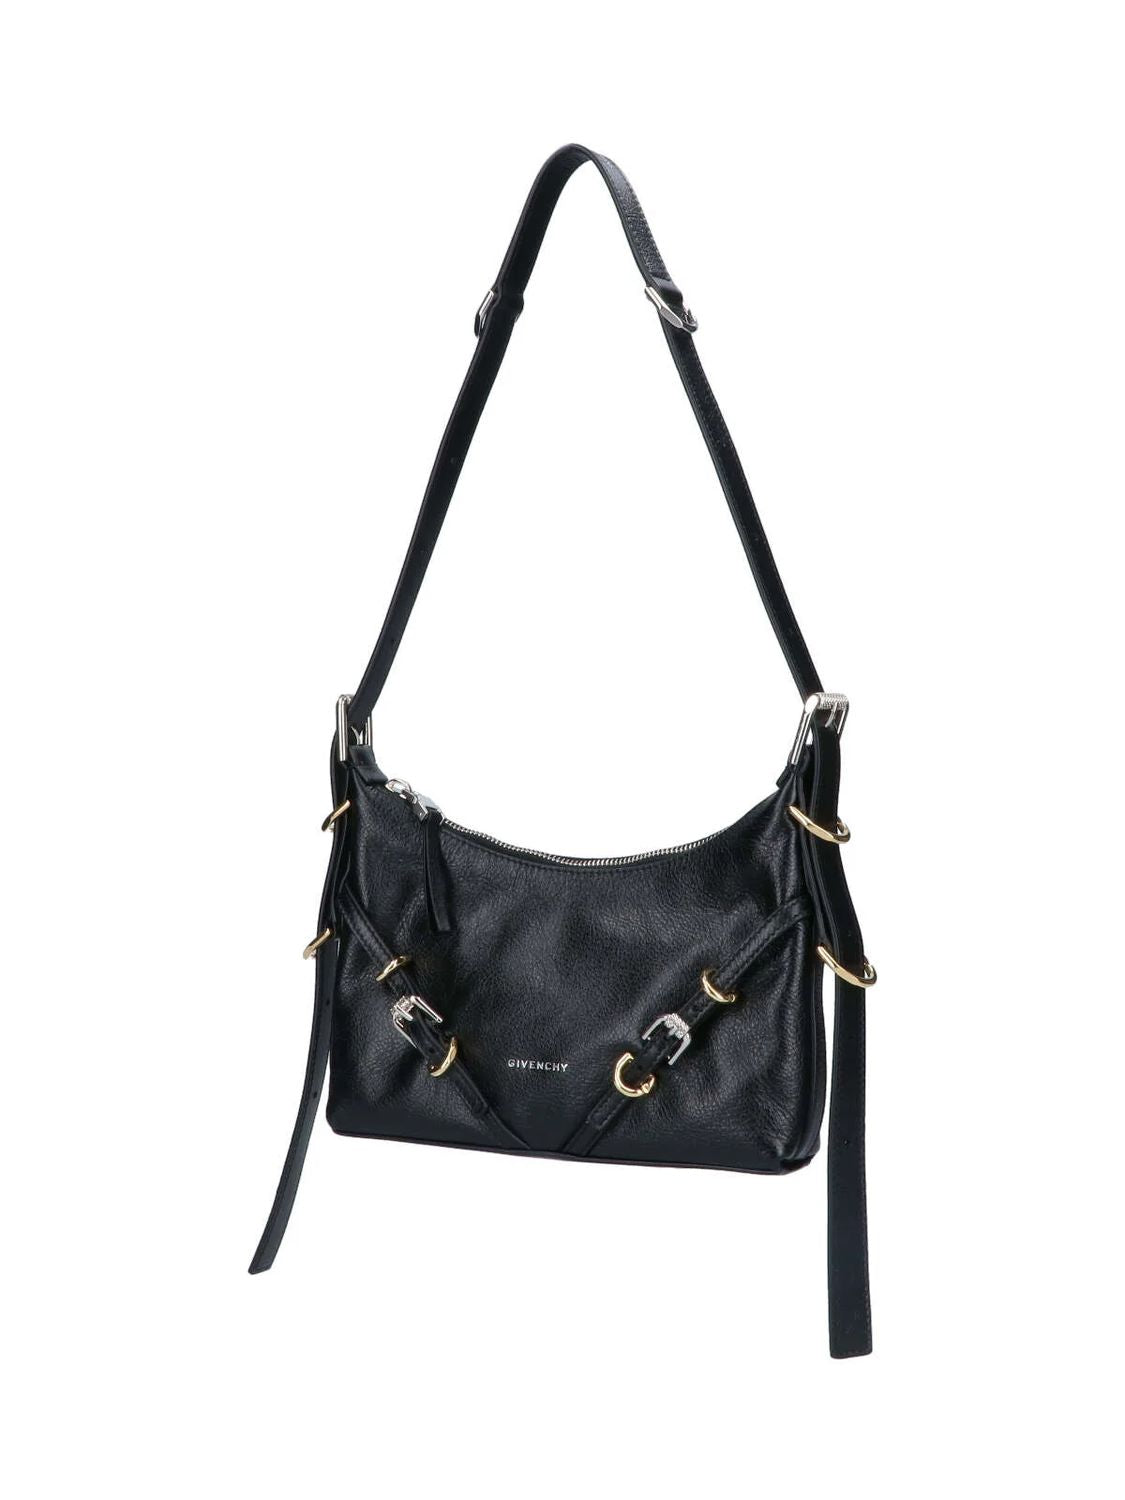 GIVENCHY Chic Mini Black Leather Handbag with Adjustable Strap and Buckle Detail